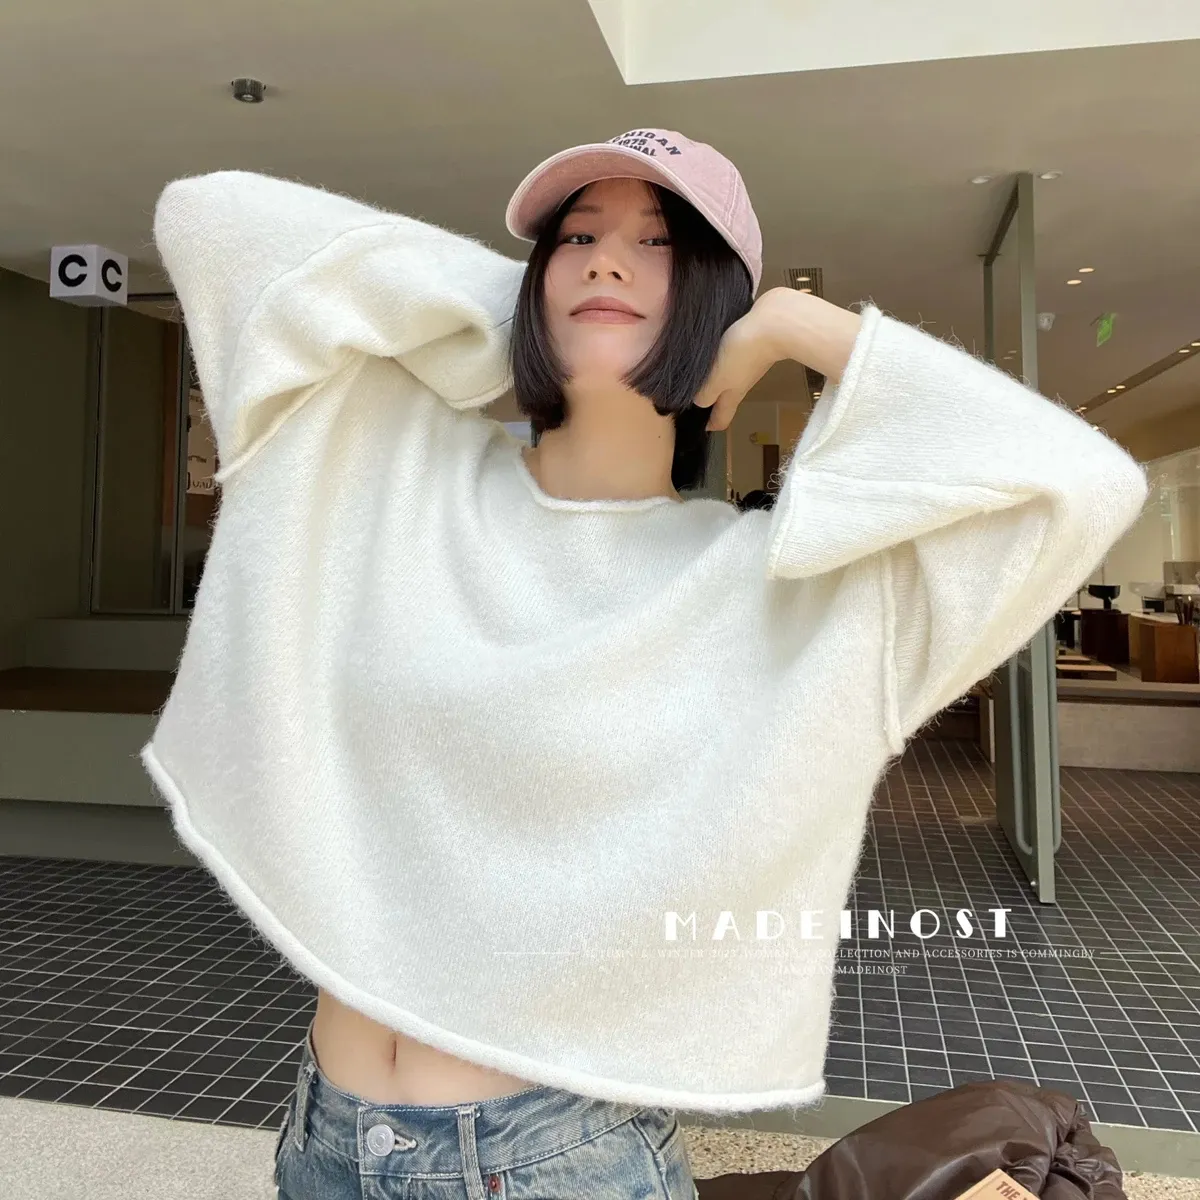 MADEINOST autumn/winter lazy style one line collar pullover loose wool sweater American retro knit top